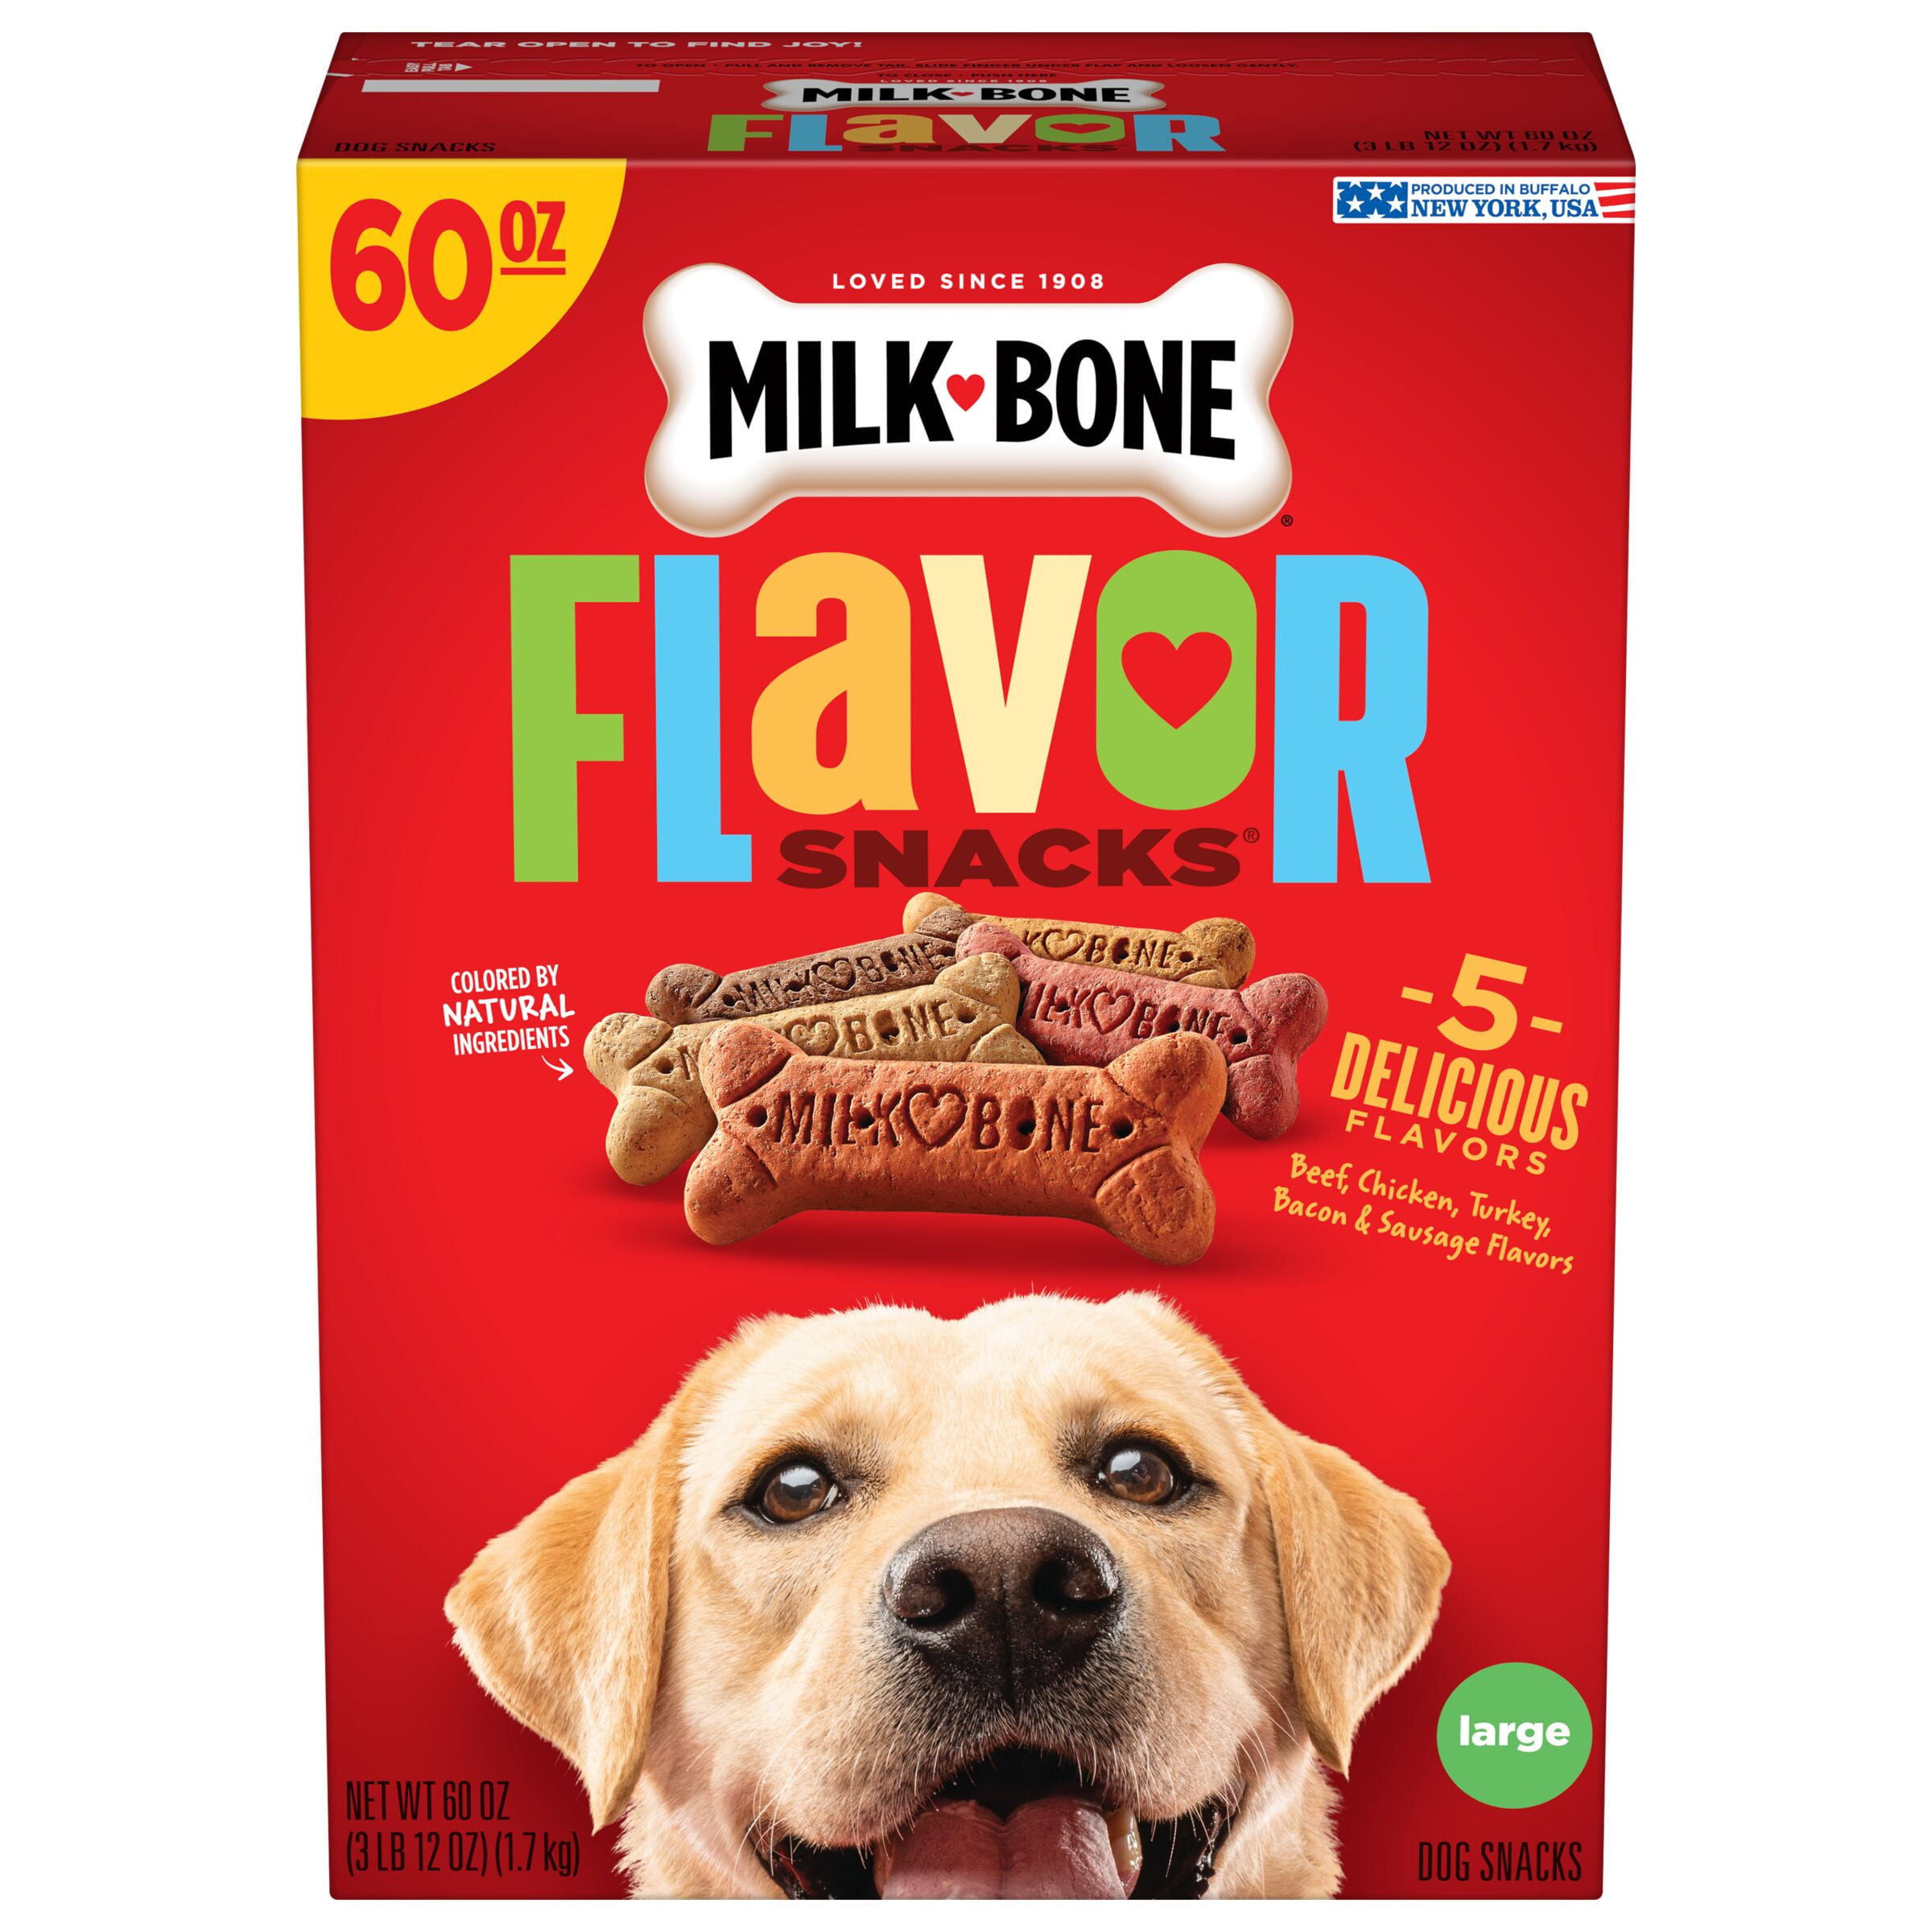 MilkBone Flavor Snacks Dog Biscuits for Largesized Dogs, 60Ounce